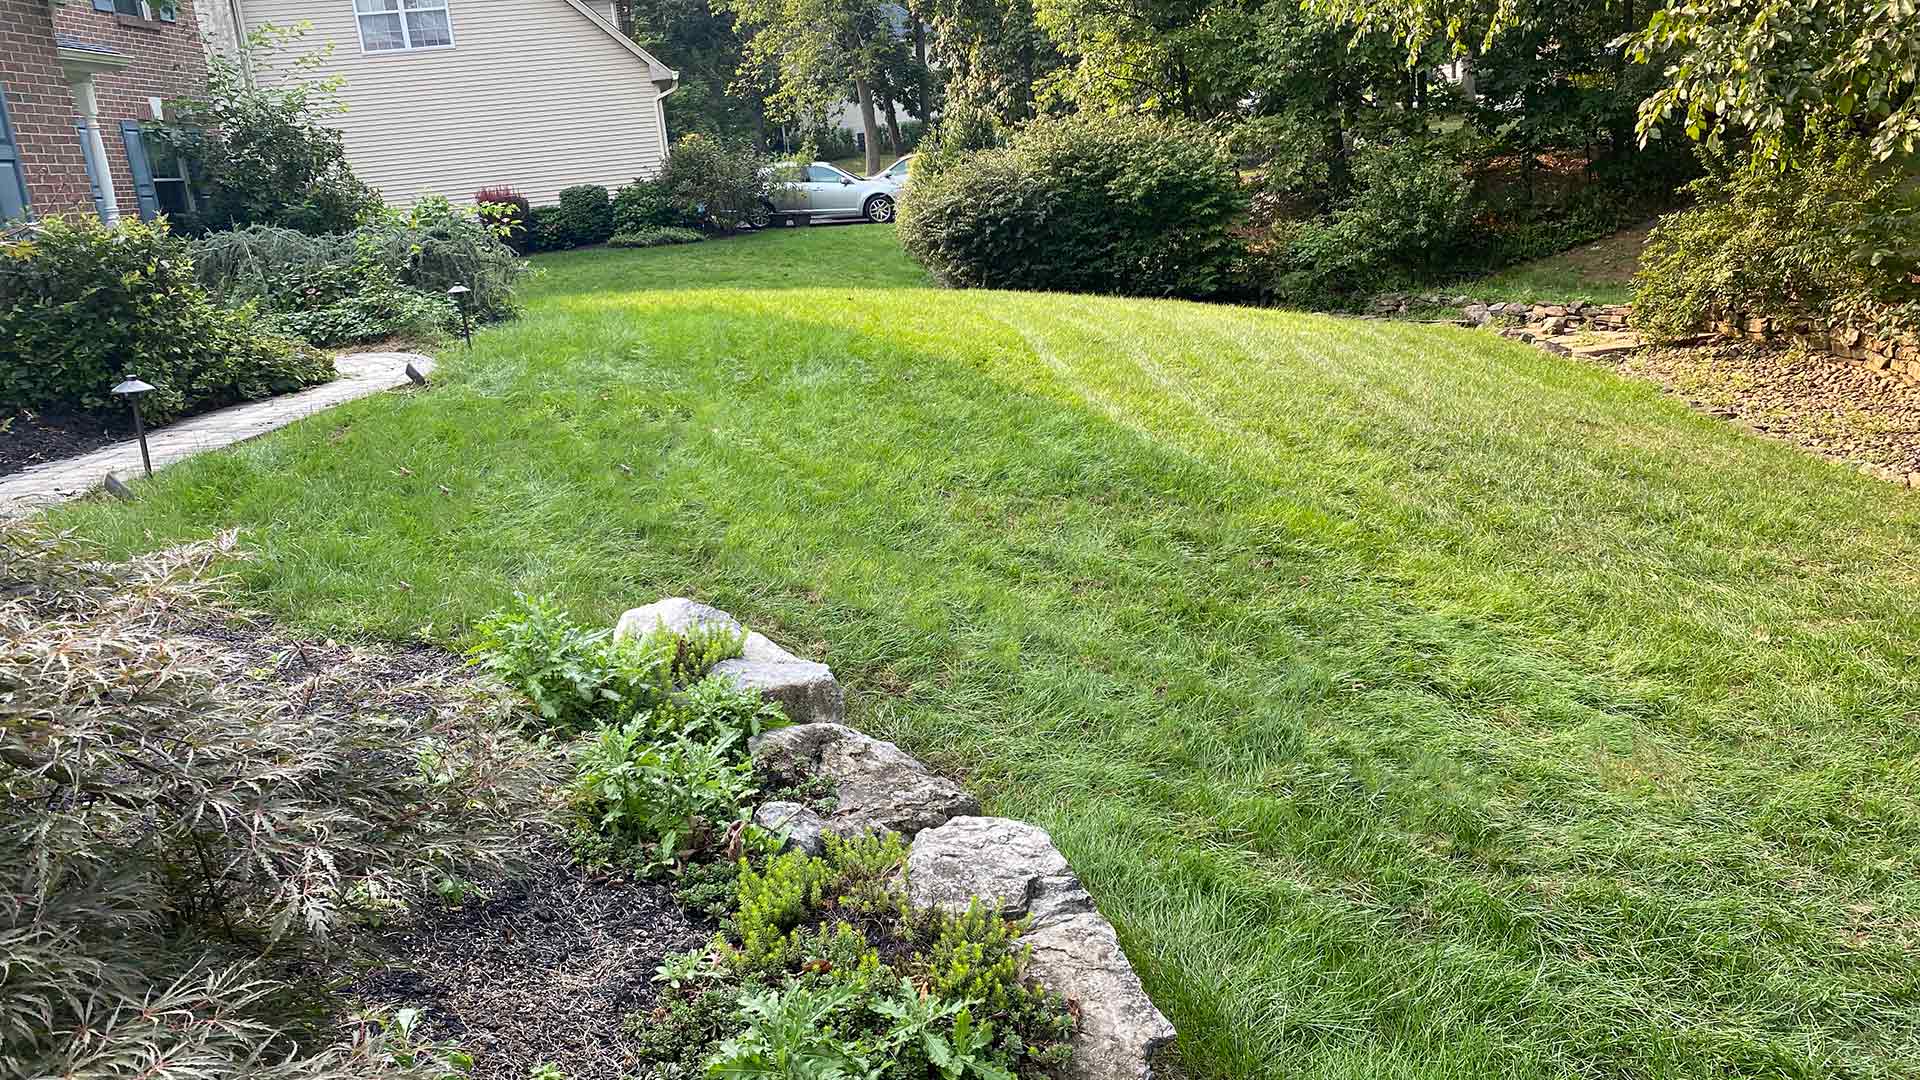 Thick, green lawn at a home in Telford, PA.